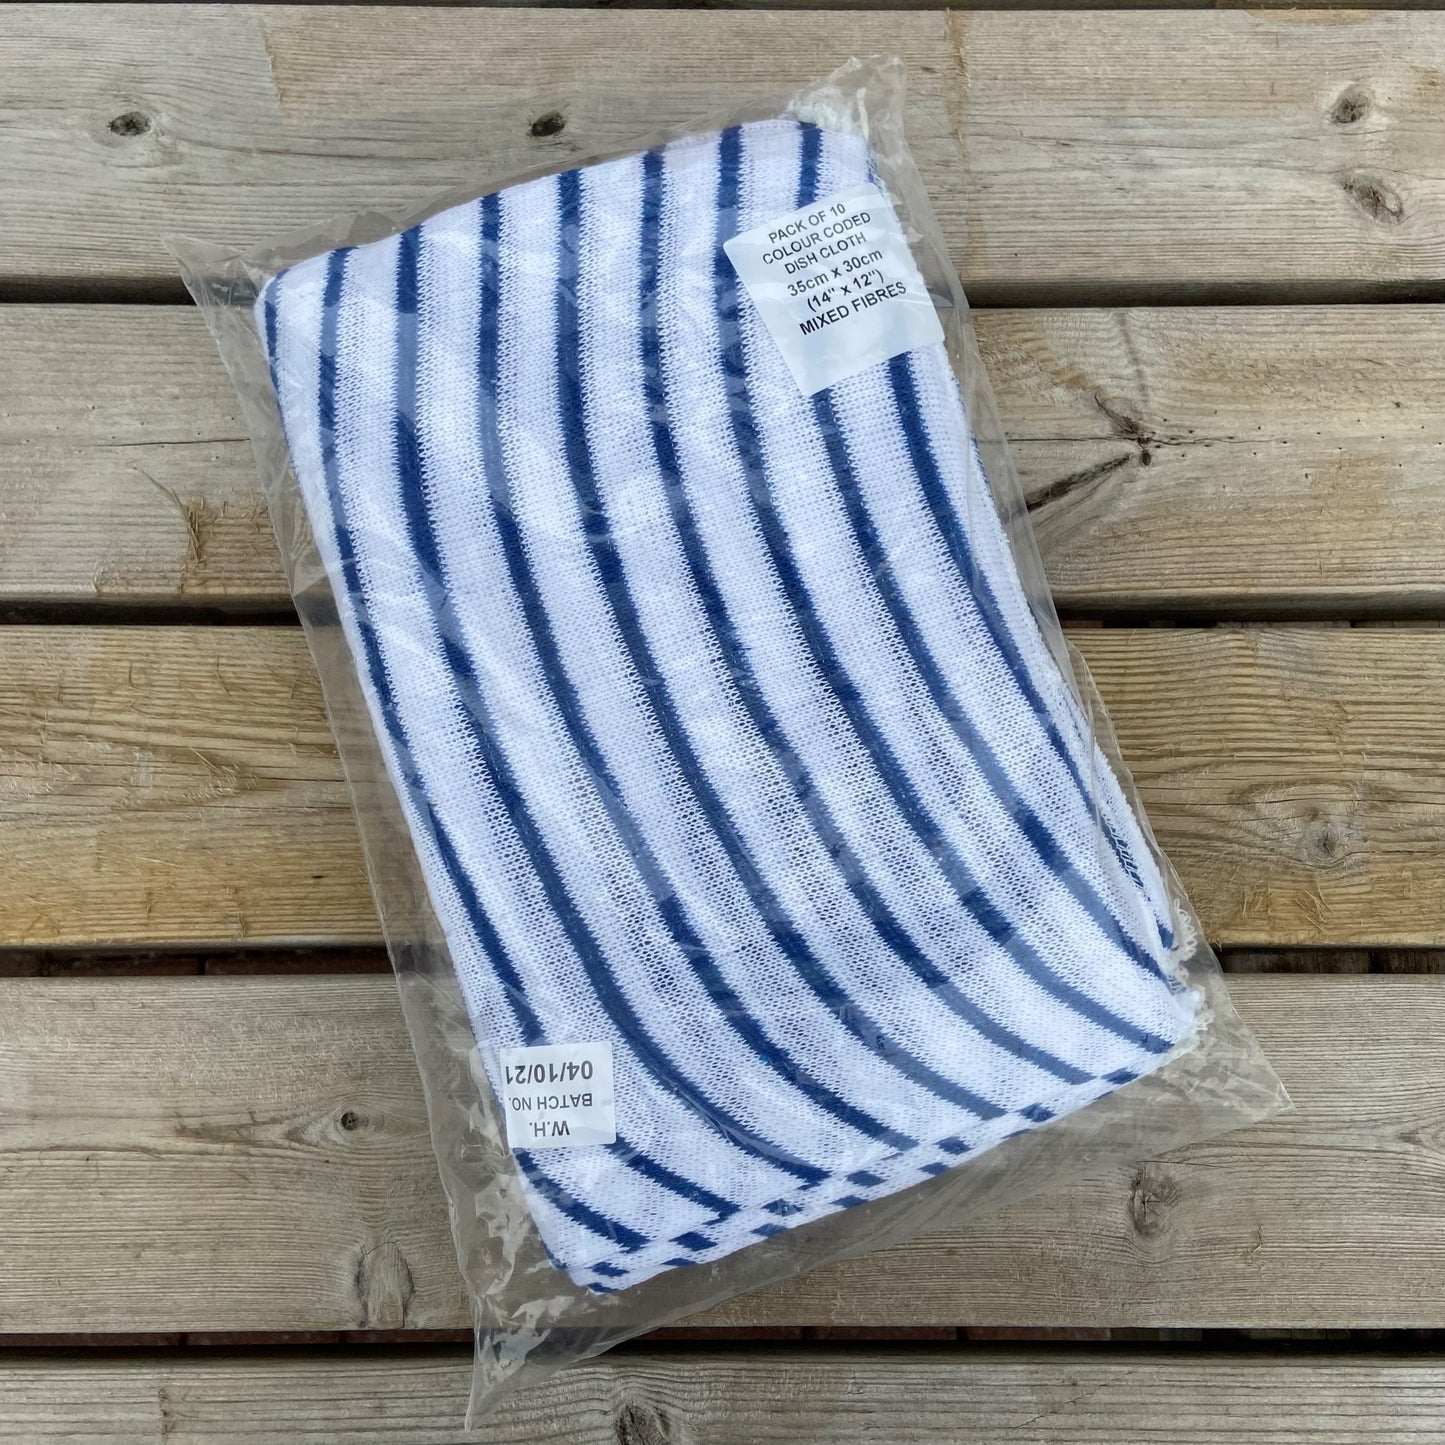 Colour Coded Cleaning Cloths Blue Pack of 10